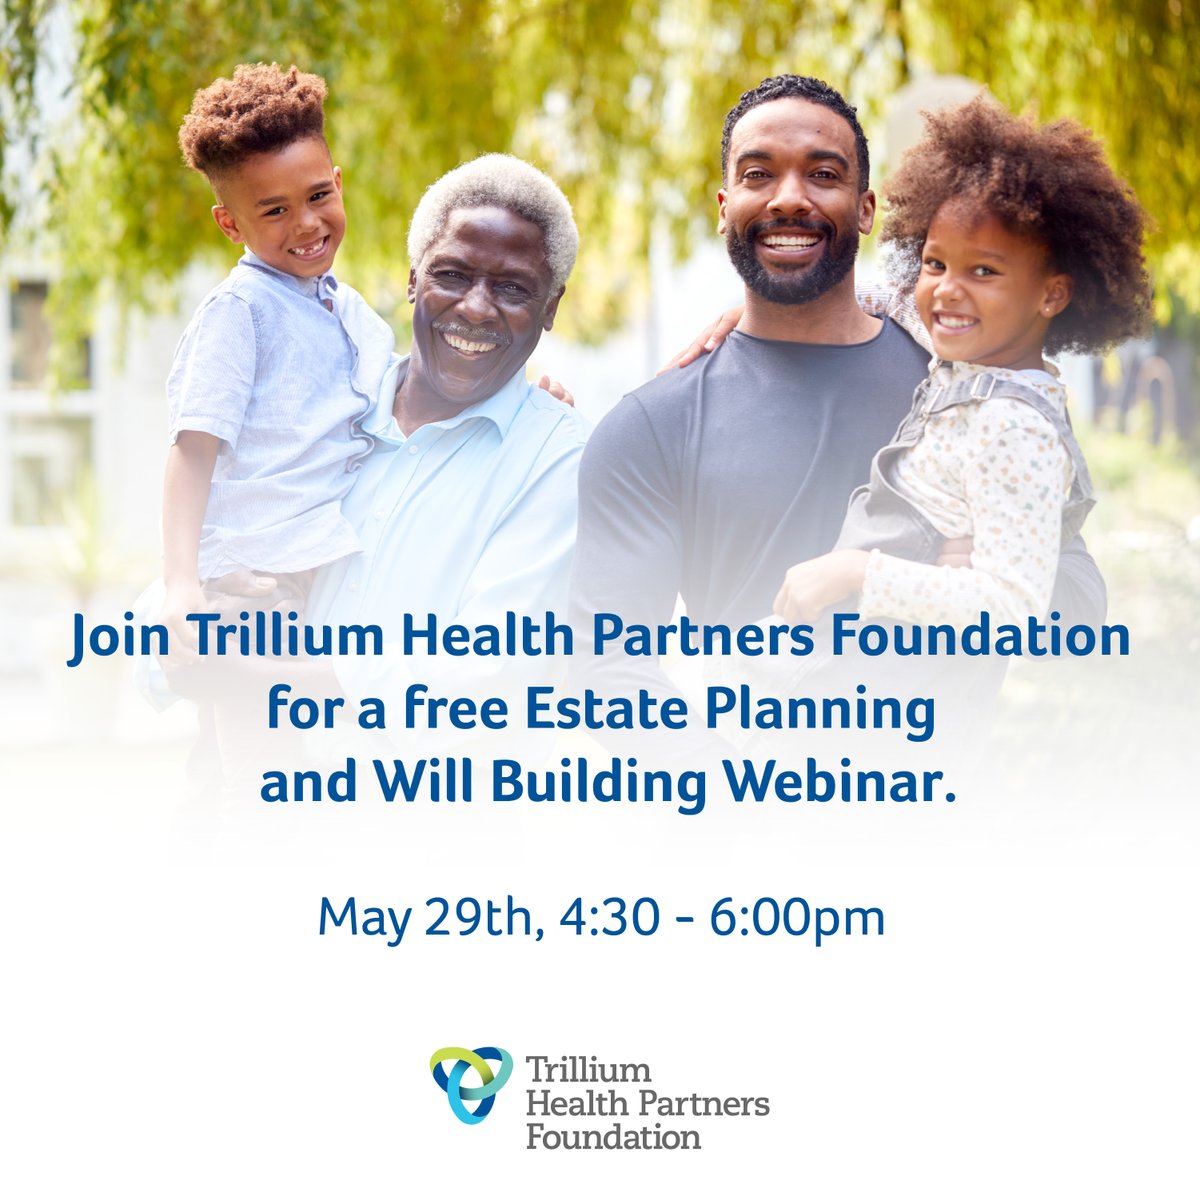 Legacy Giving 101 Webinar Happening May 29 ‼️ Join financial advisor Sherilyn Ketchen & @joinwillfora's Tracy Tsui to learn how to build a strategic estate plan that allows you to leave a bigger legacy & support @THP_hospital ➡️bit.ly/4bm6Bx5